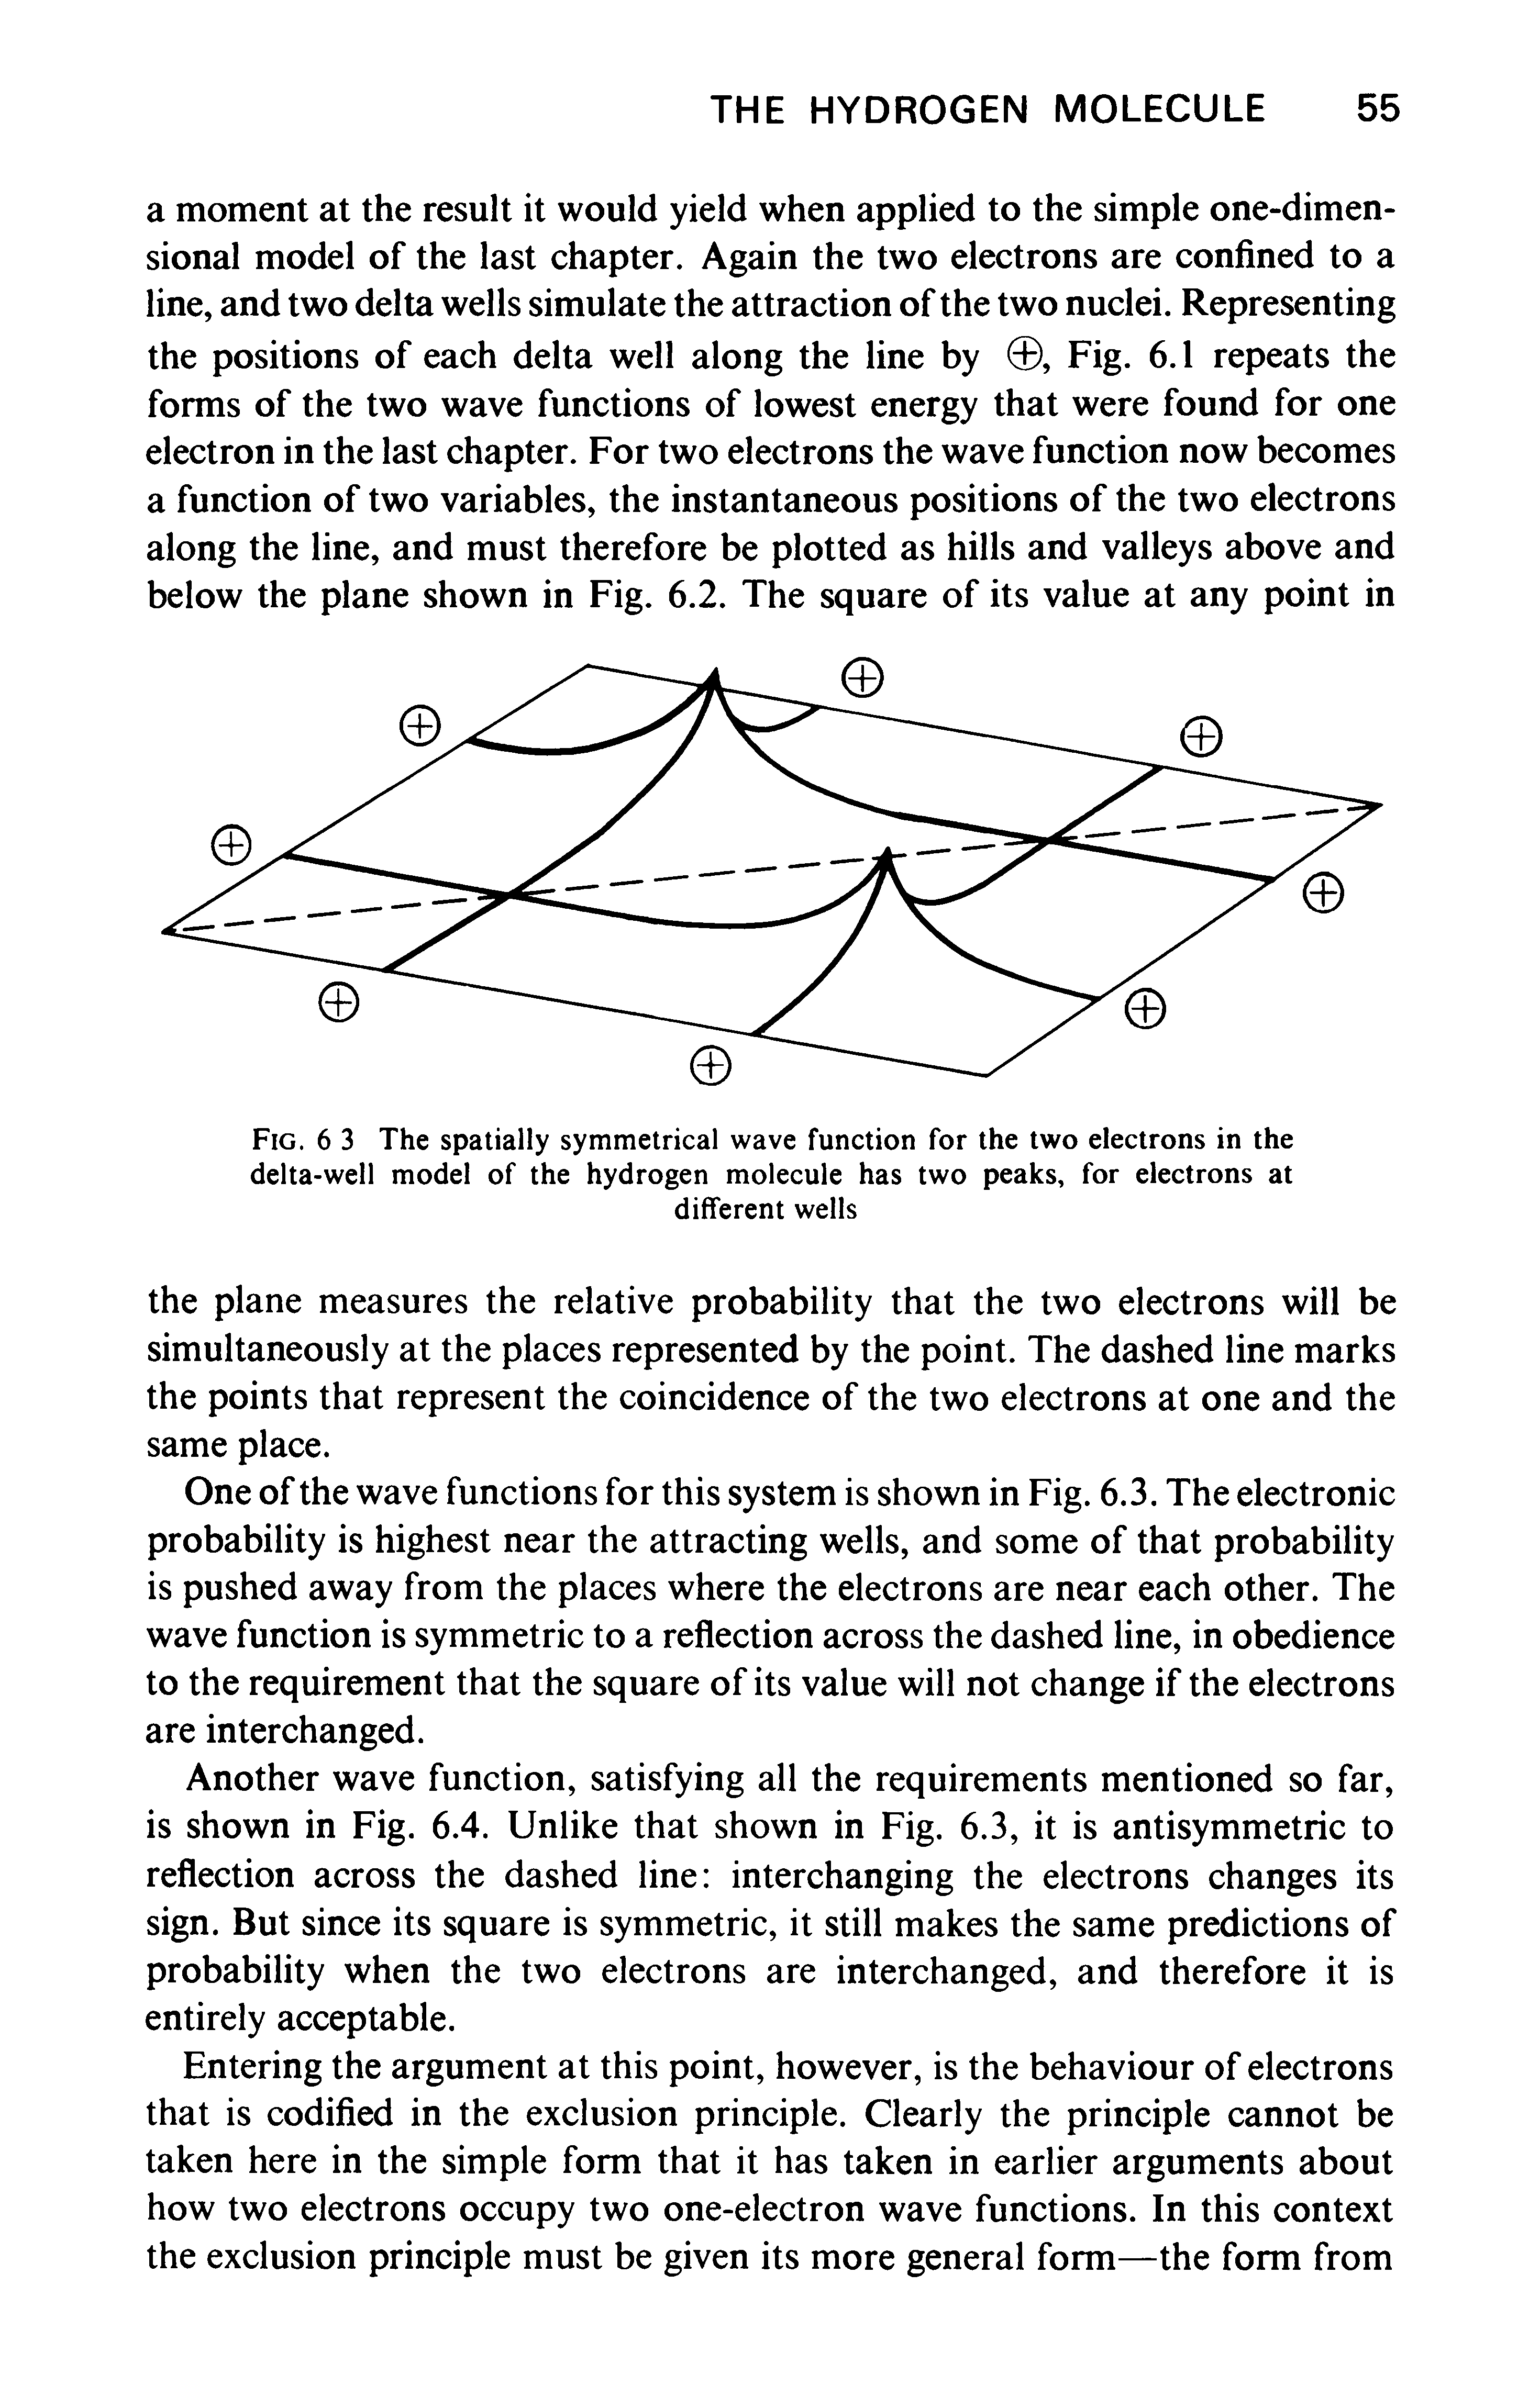 Fig. 6 3 The spatially symmetrical wave function for the two electrons in the delta-well model of the hydrogen molecule has two peaks, for electrons at different wells...